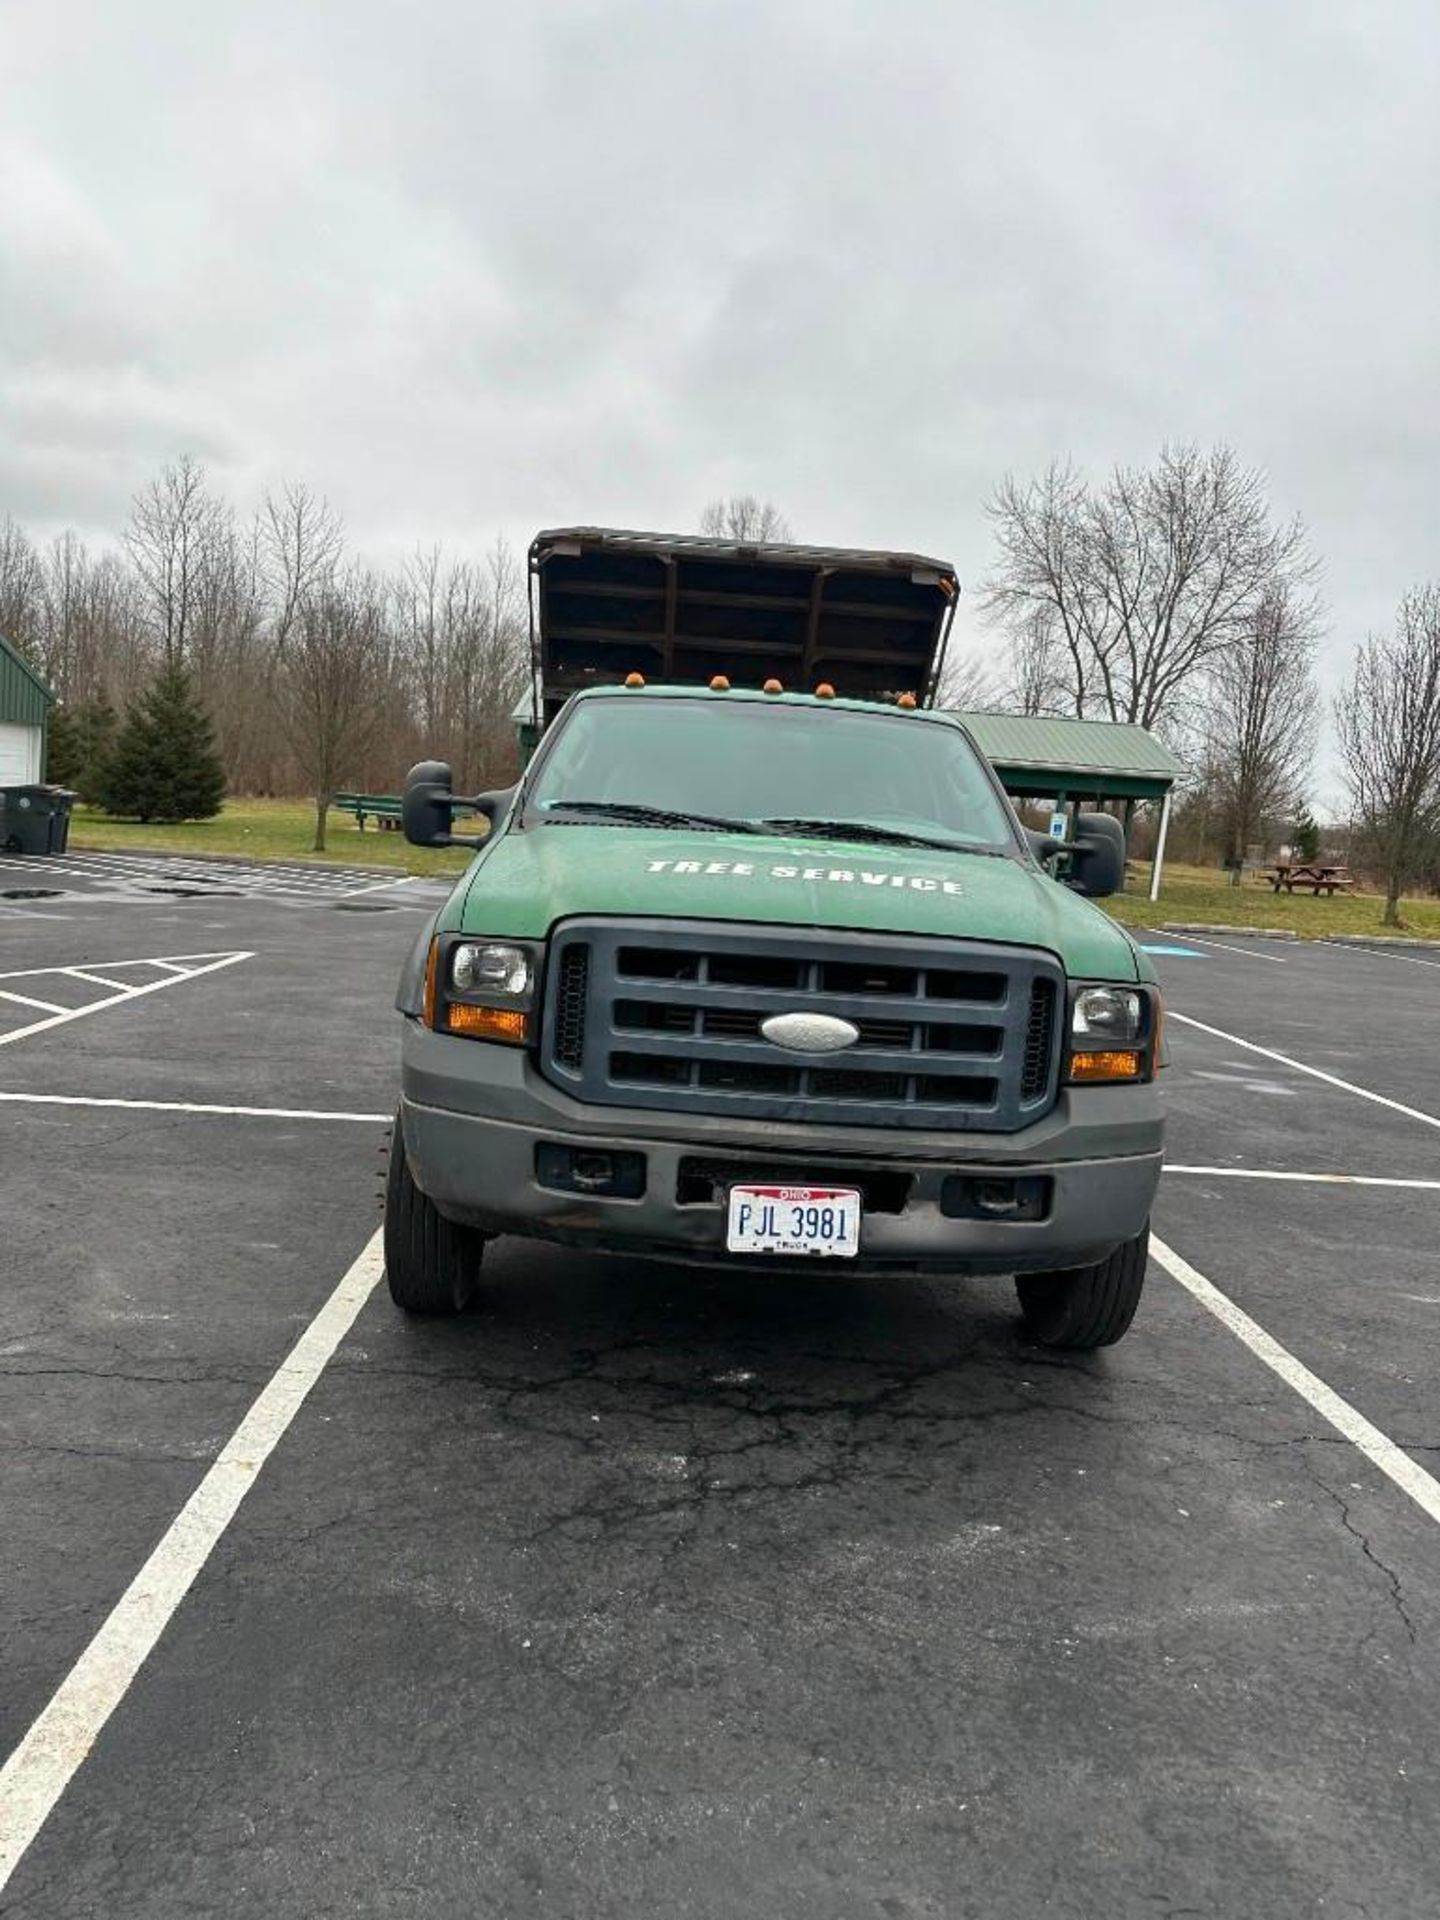 2007 Ford F-450 Pickup Truck (located off-site, please read description) - Image 2 of 6